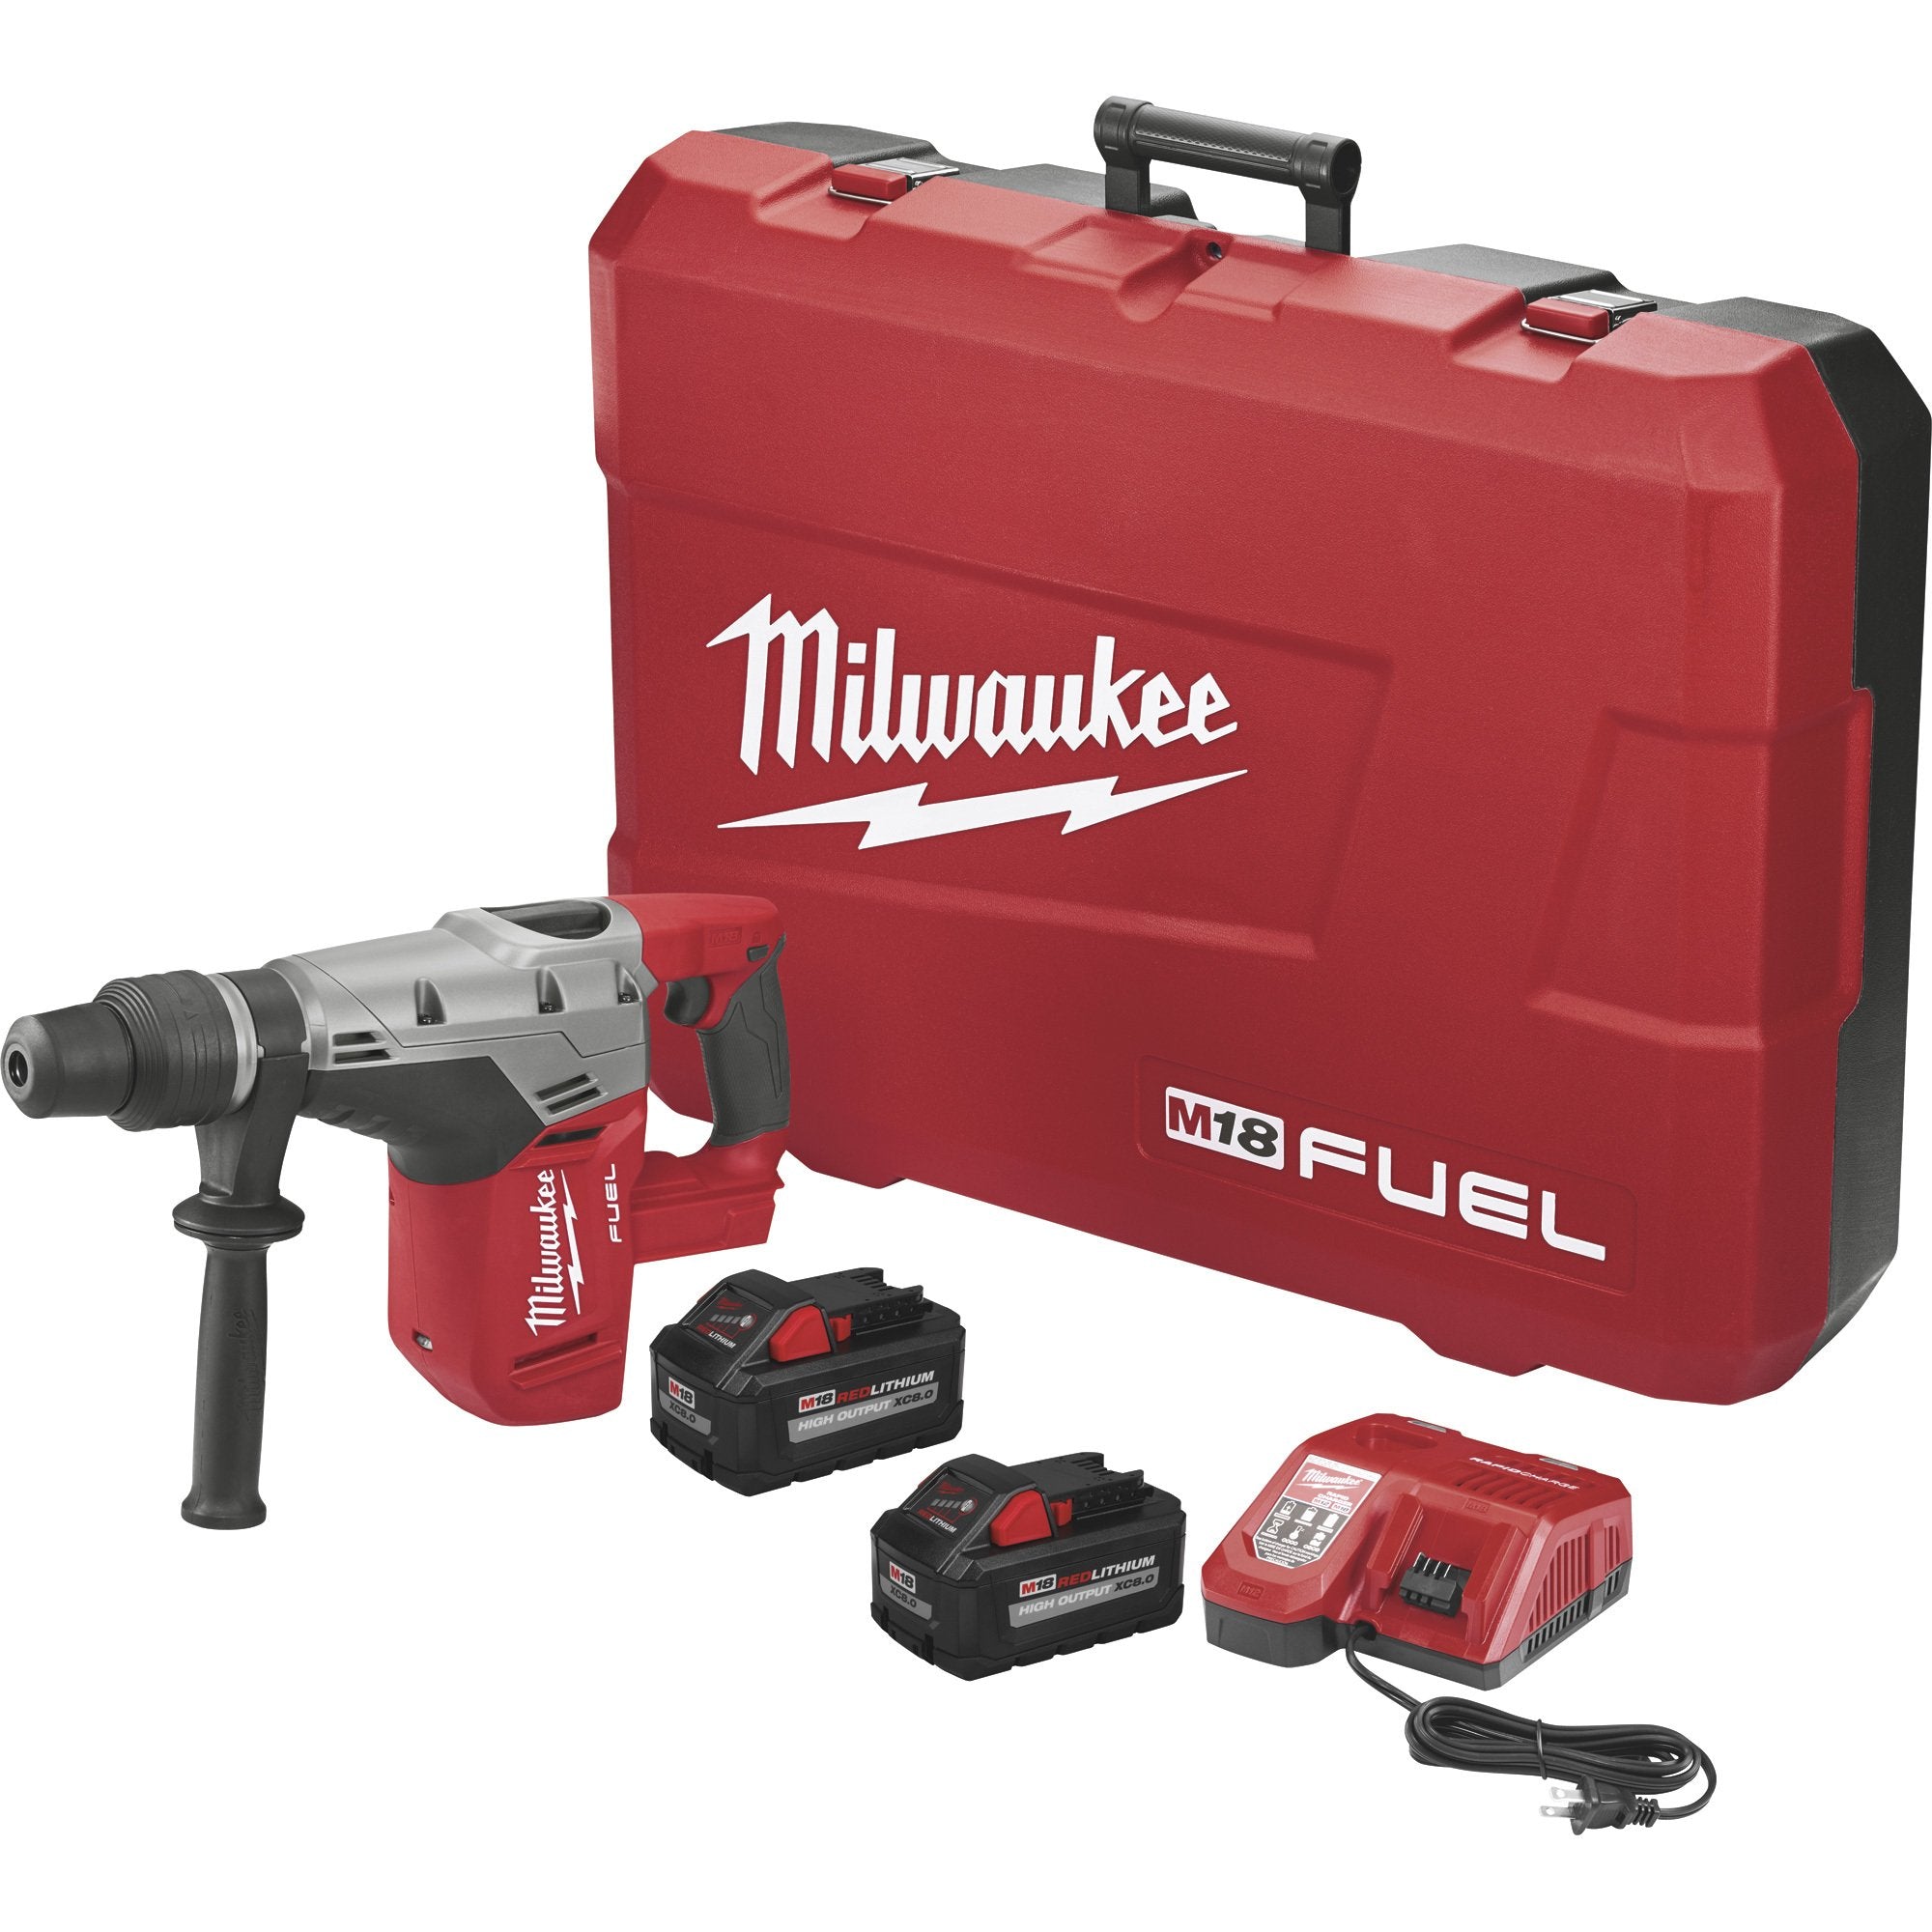 Milwaukee M18 Fuel 1 9/16in. SDS Max Hammer Drill Kit - $600